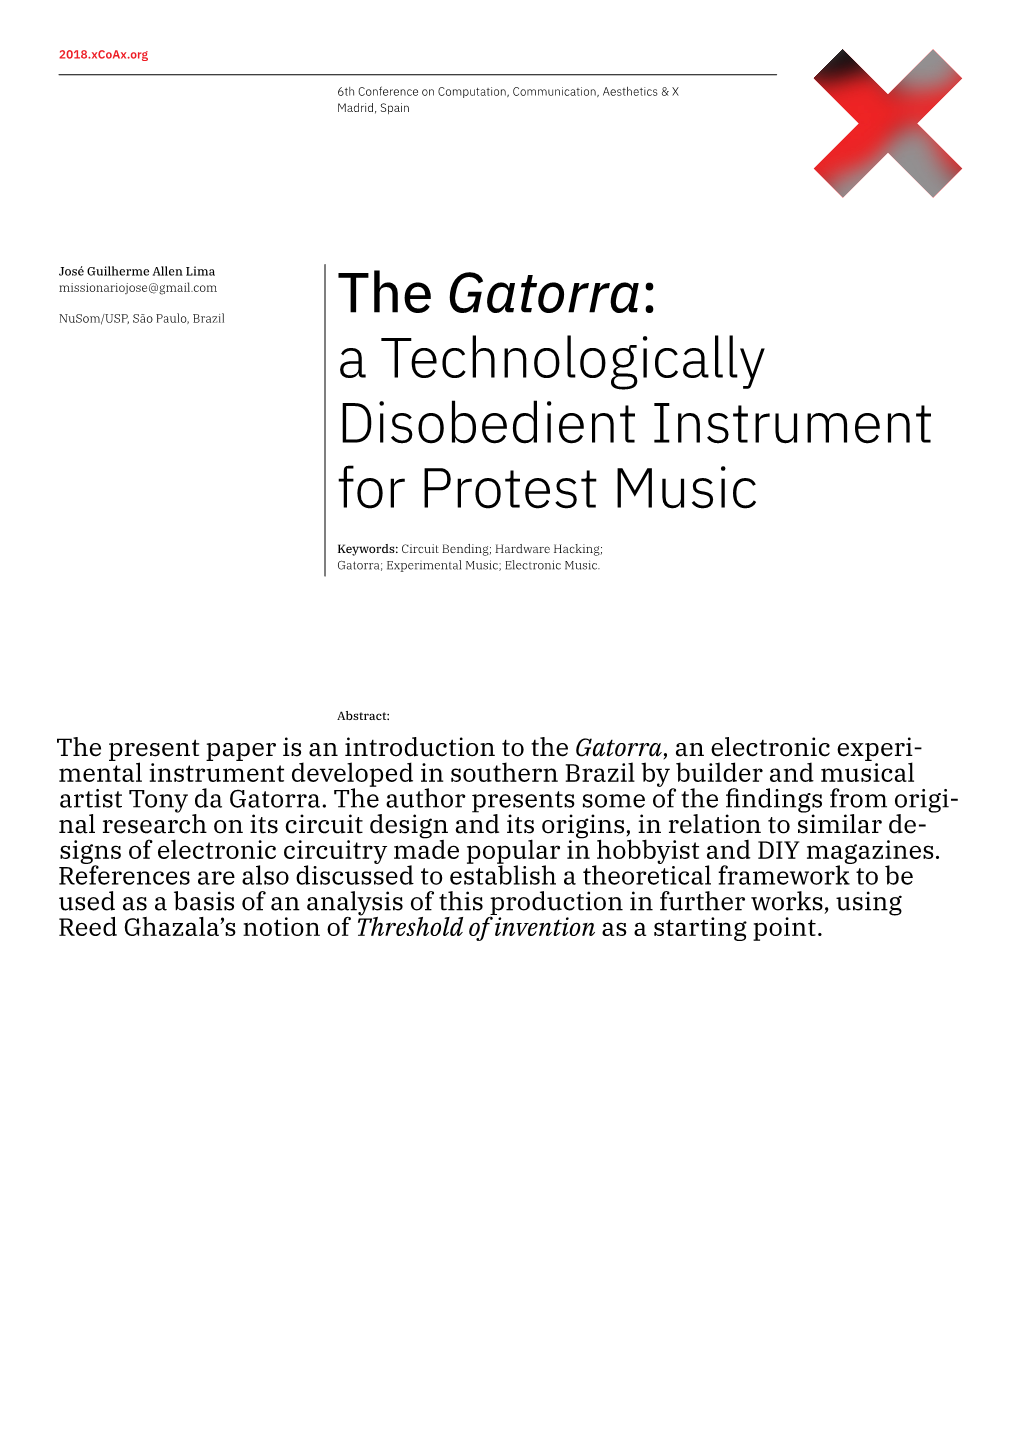 The Gatorra: a Technologically Disobedient Instrument for Protest Music